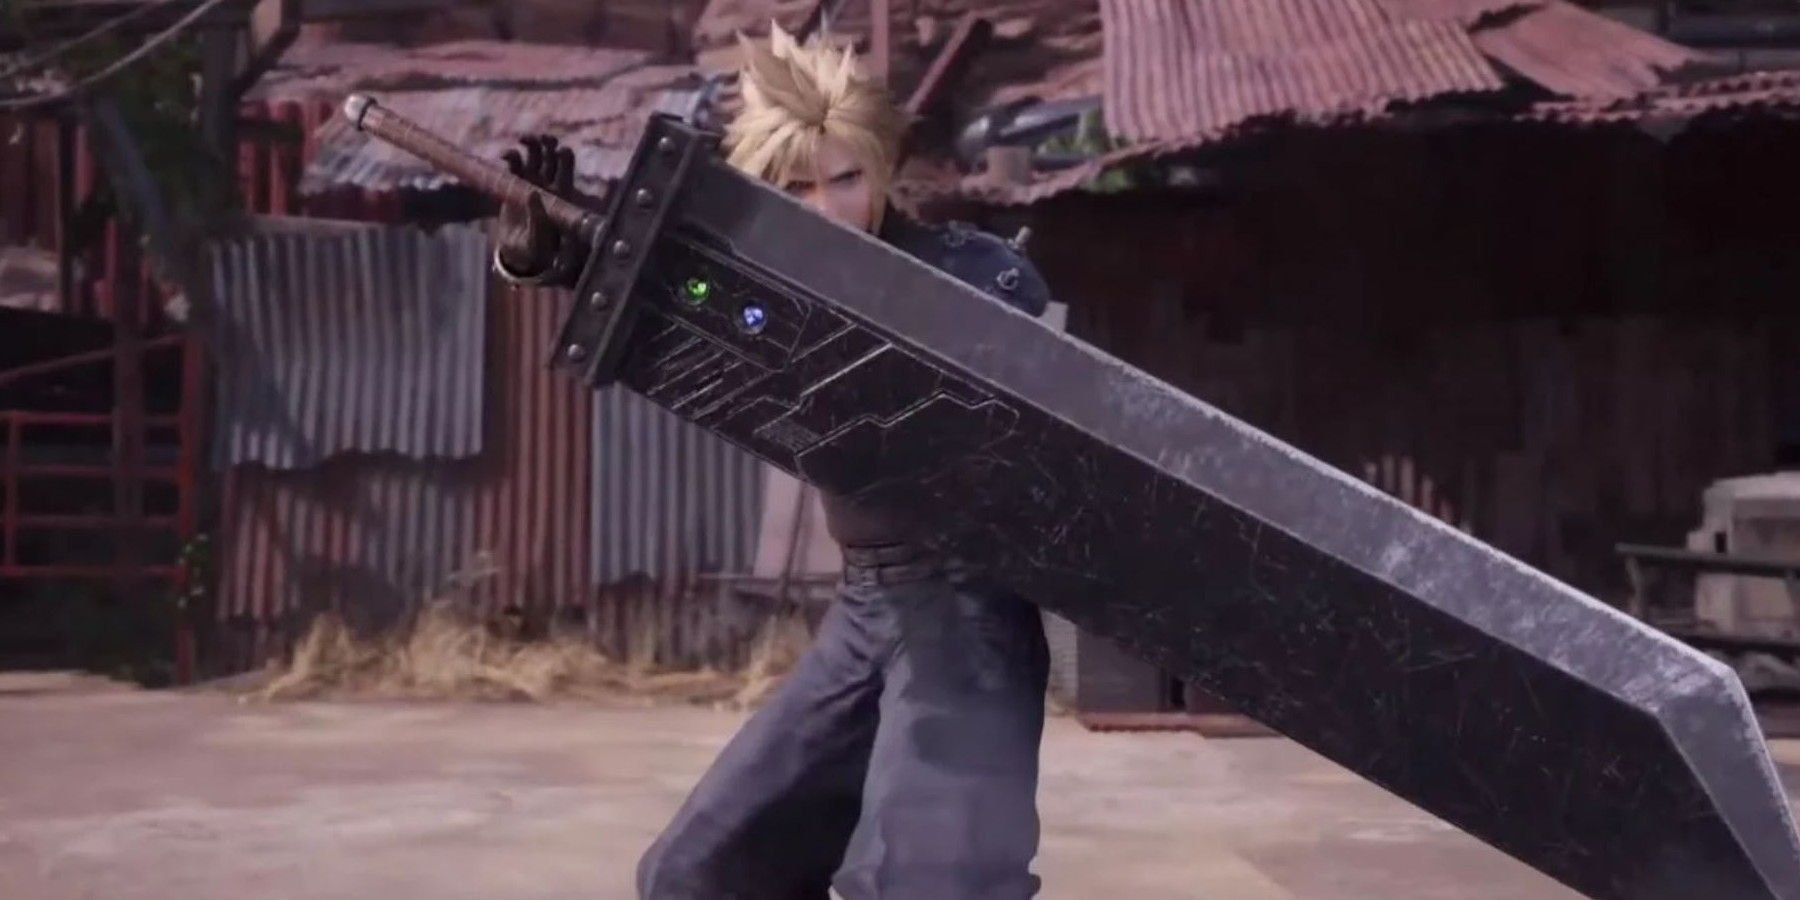 Cloud holding the Buster Sword, a weapon that belonged to Angeal and then Zack, in front of some scrap metal buildings.